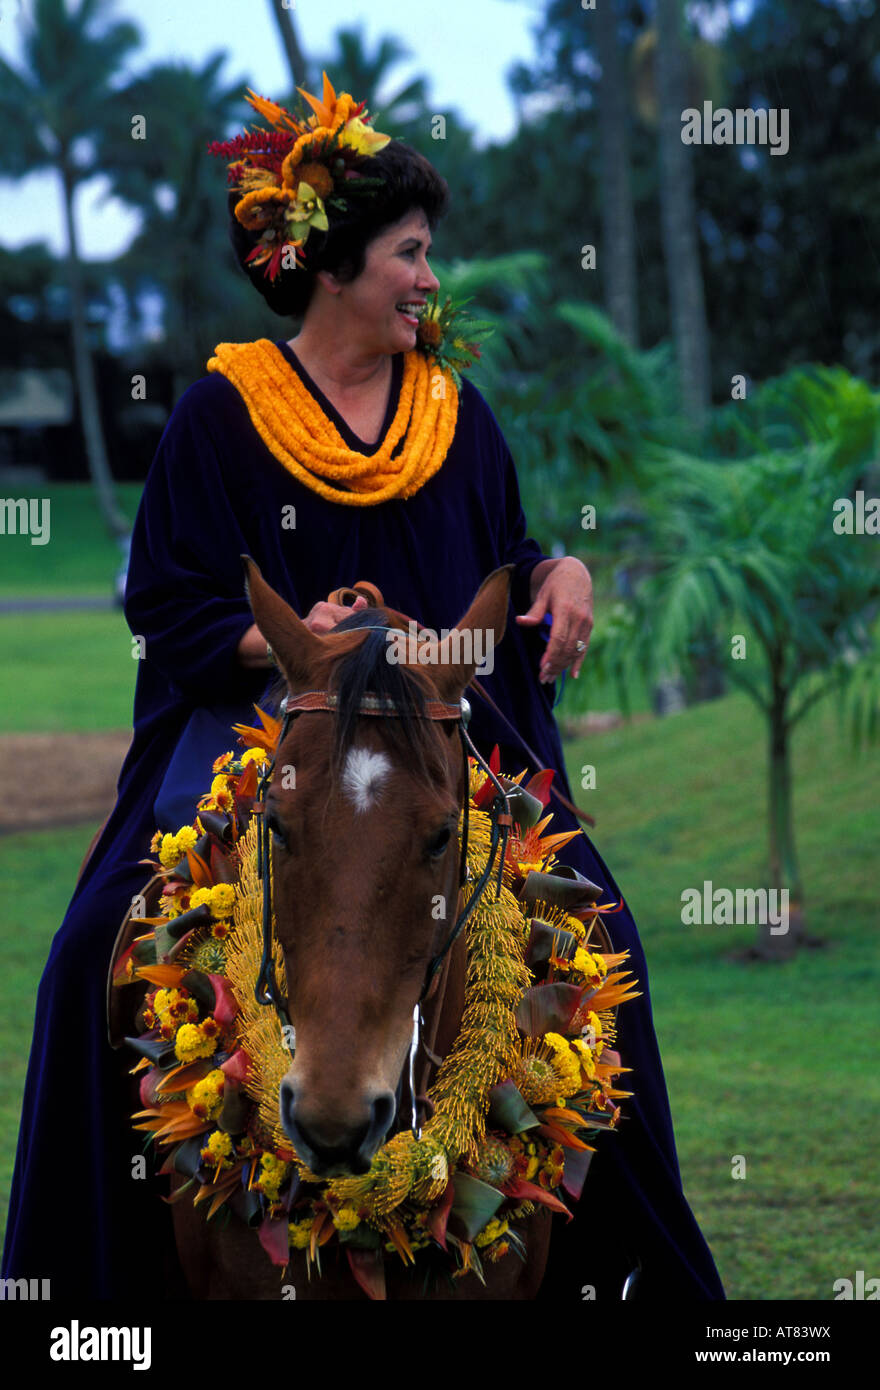 Woman riding horse (pau rider) with leis at Merrie Monarch festival parade Stock Photo